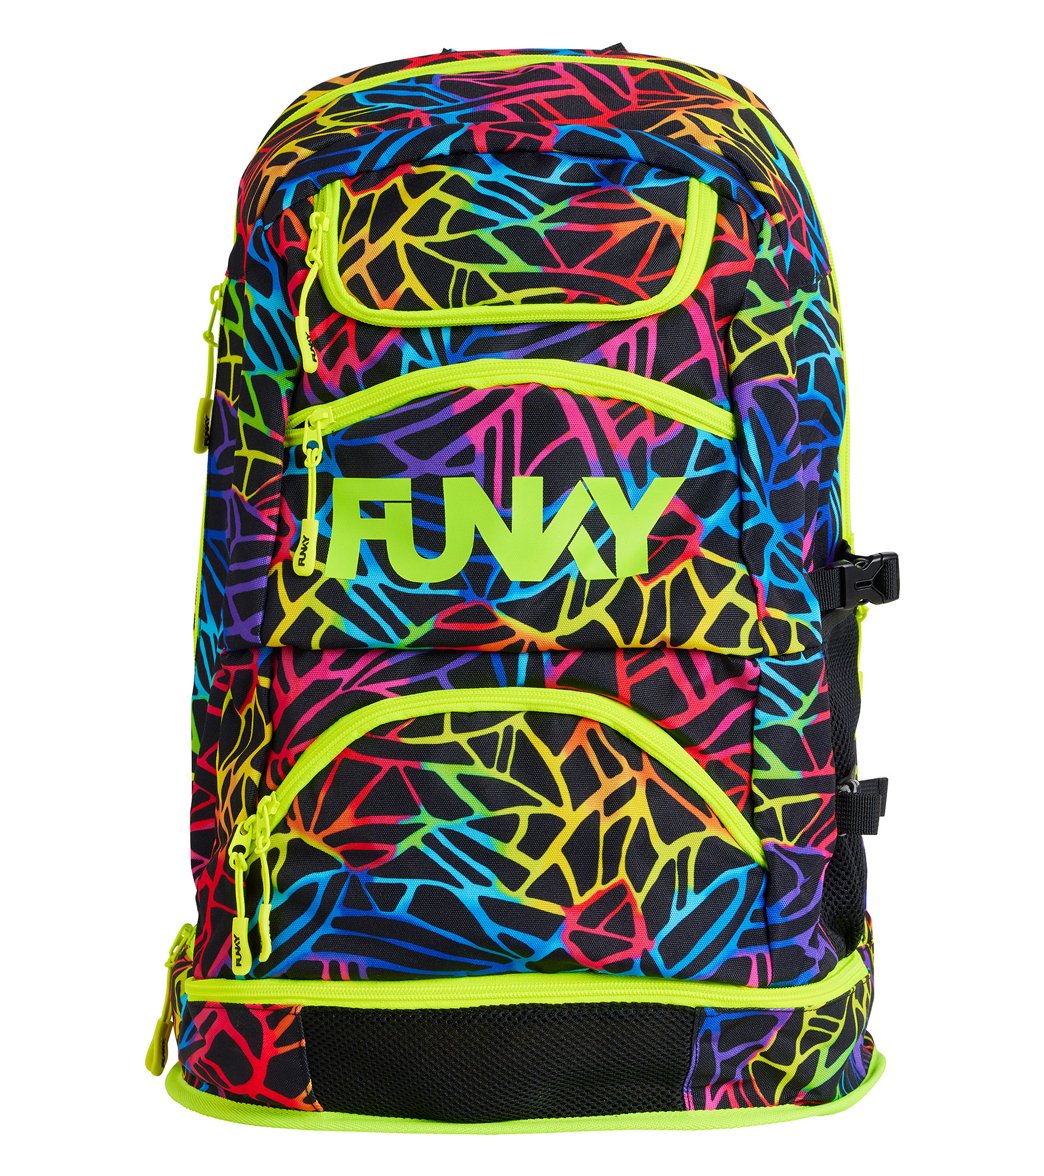 Funky Trunks Elite Squad Backpack - Rainbow Web Polyester - Swimoutlet.com